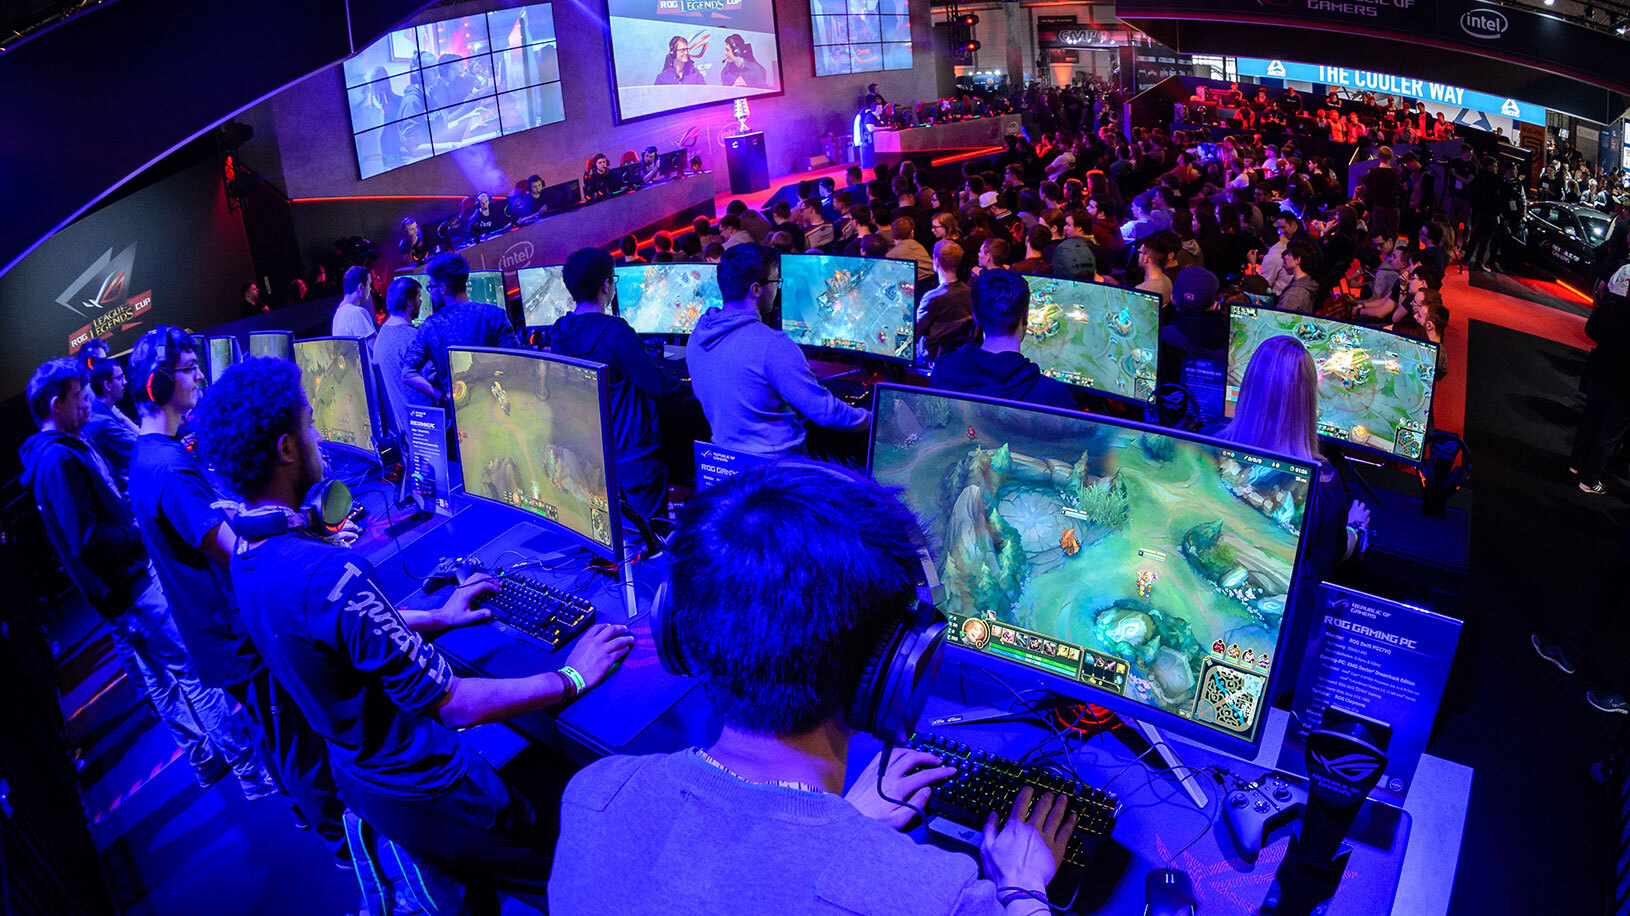 Crowd watching several players gaming